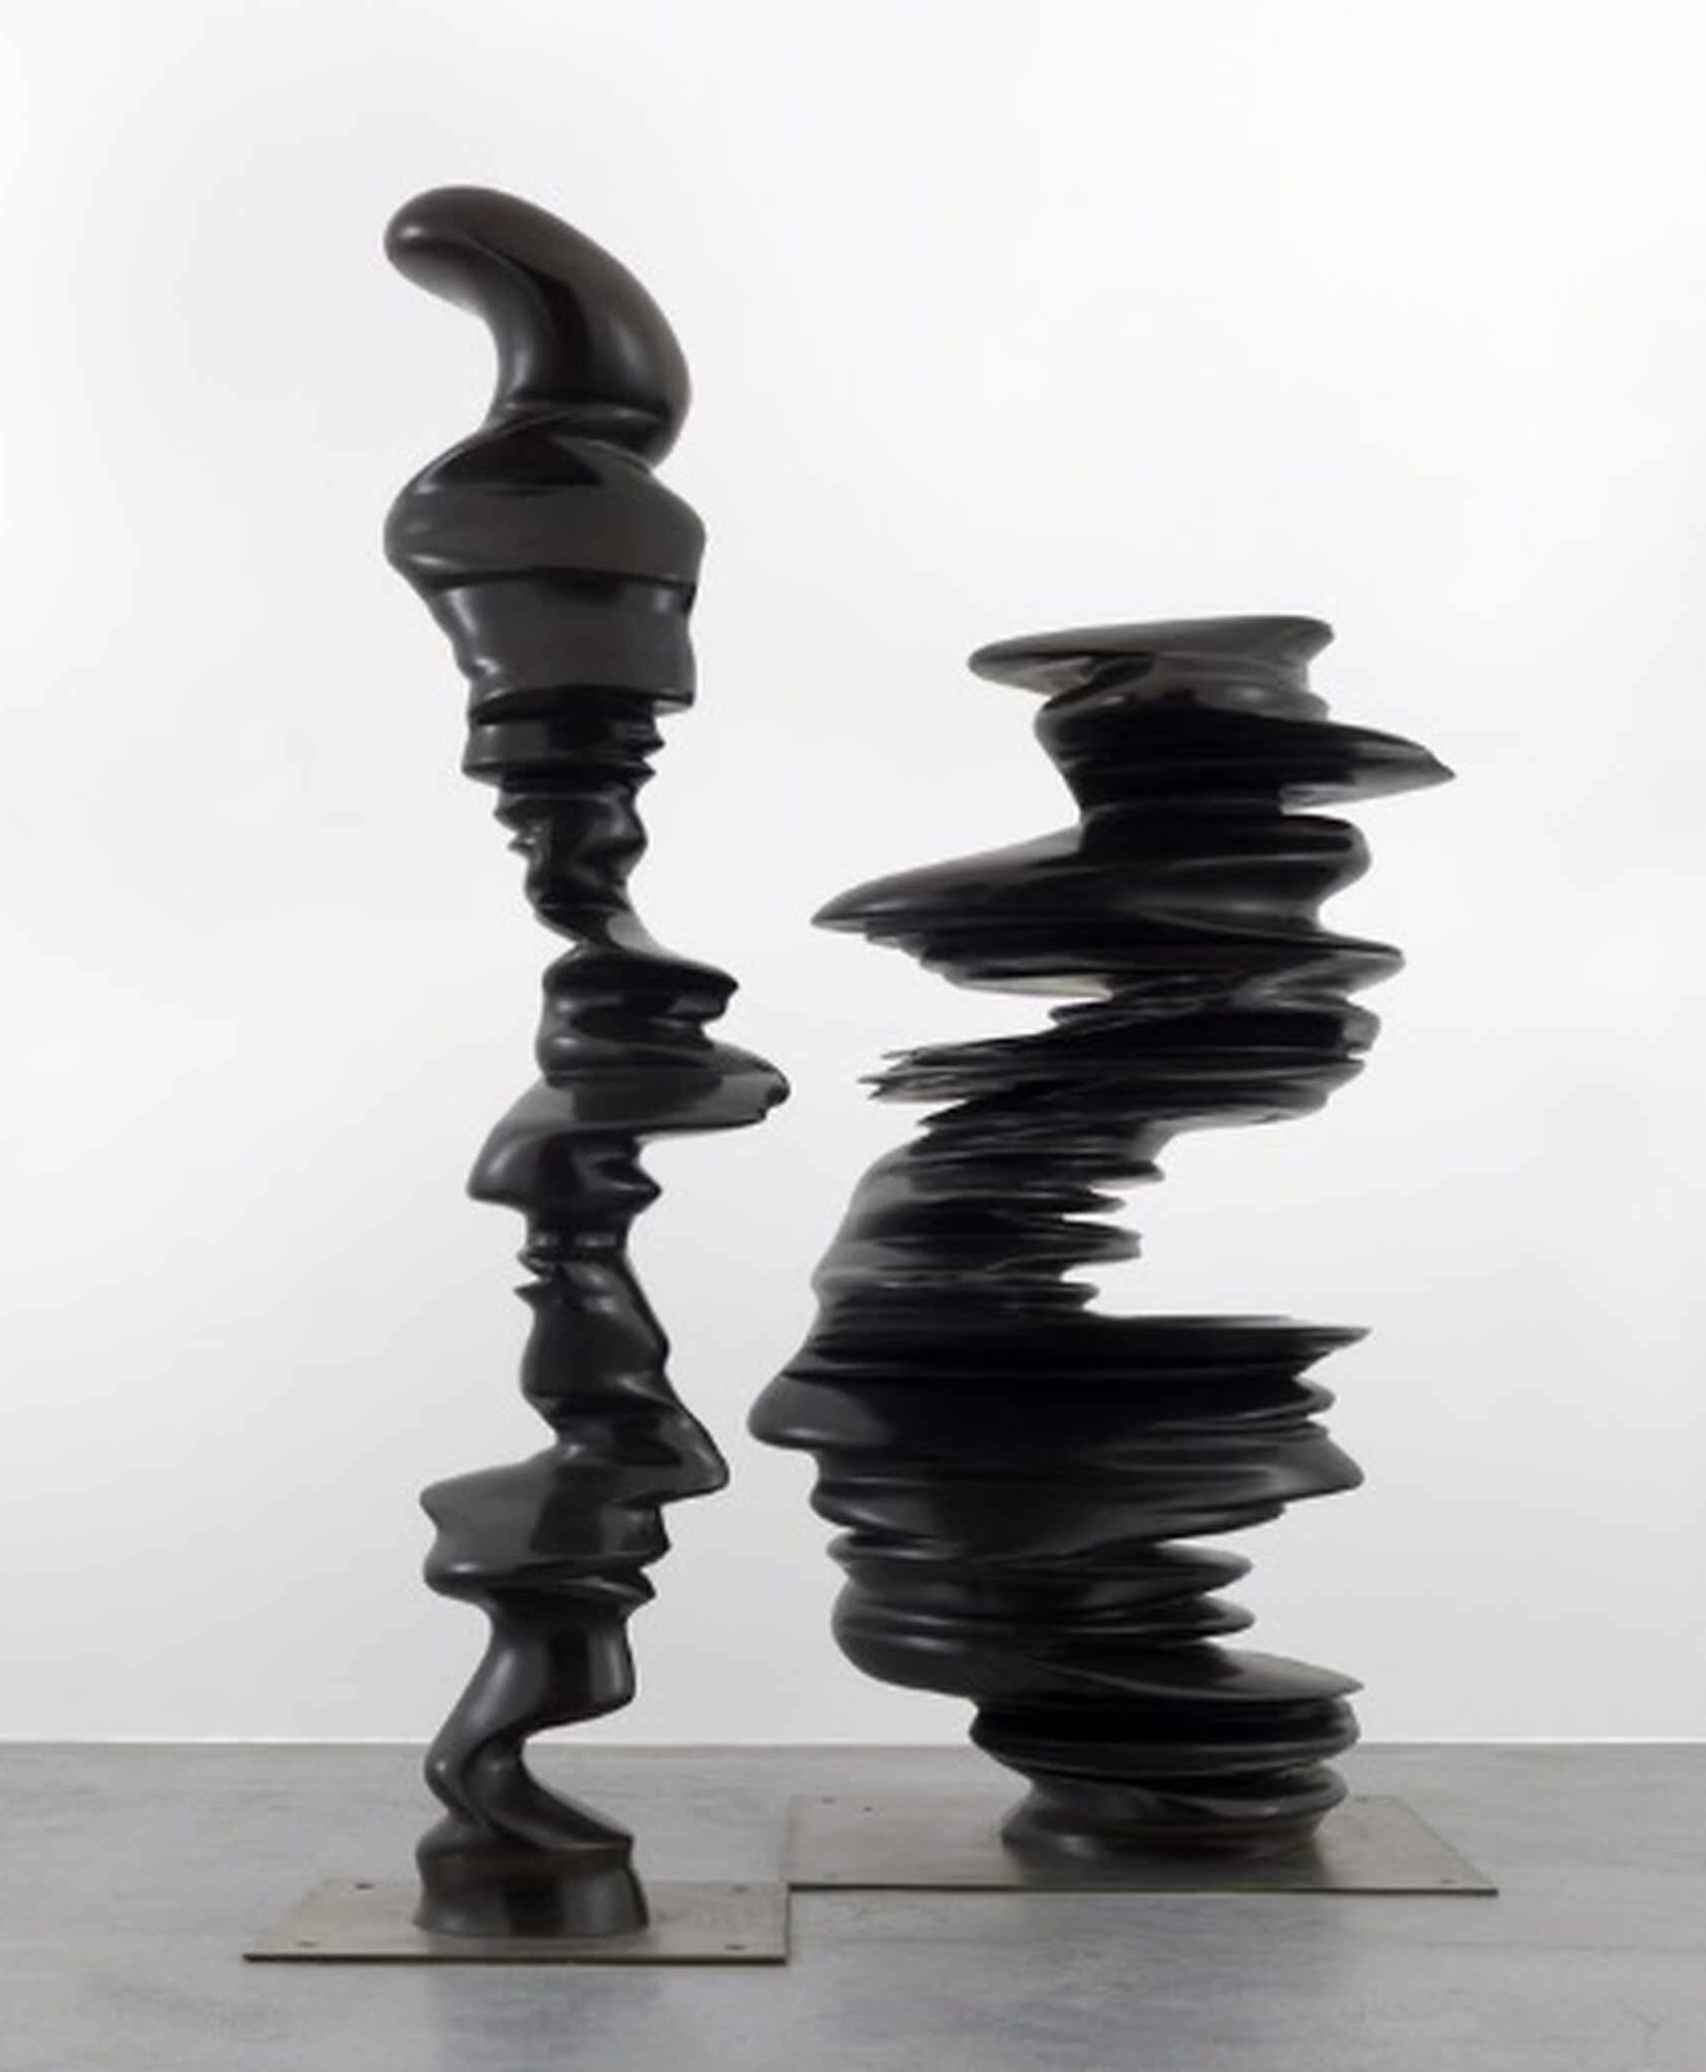 'Out of sight, out of mind' (2003), obra de Tony Cragg.